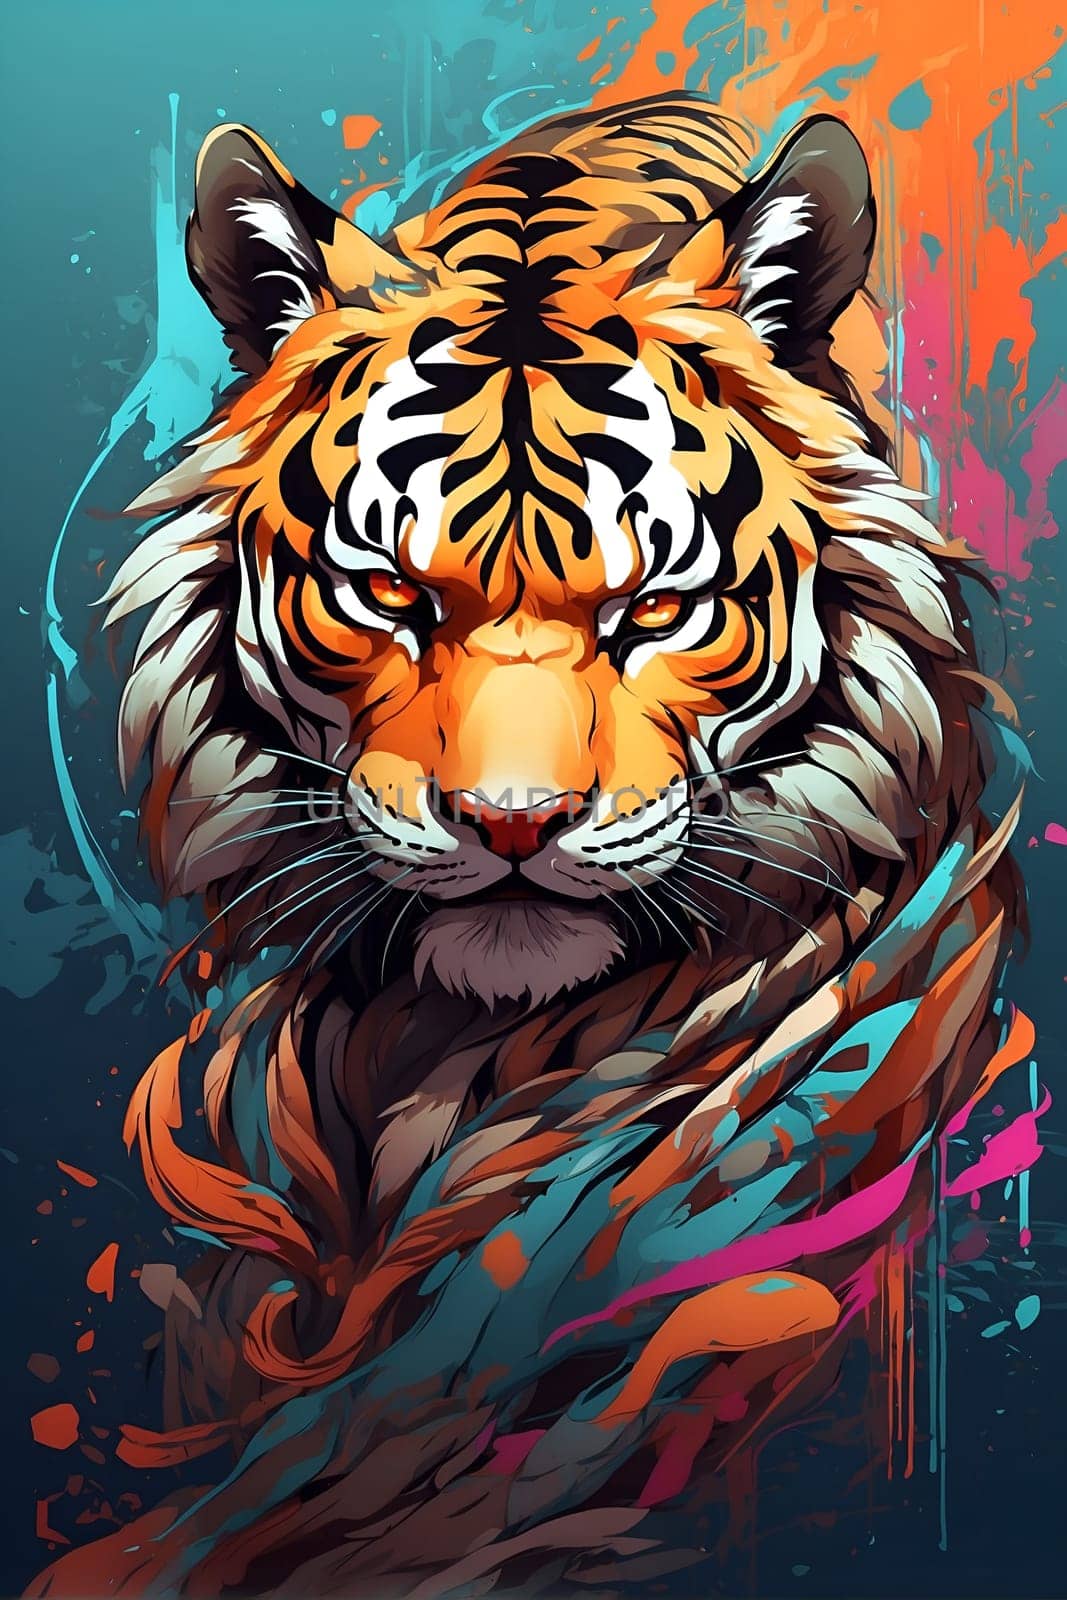 A tiger with vibrant paint splatters on its face gazes intently at the camera.